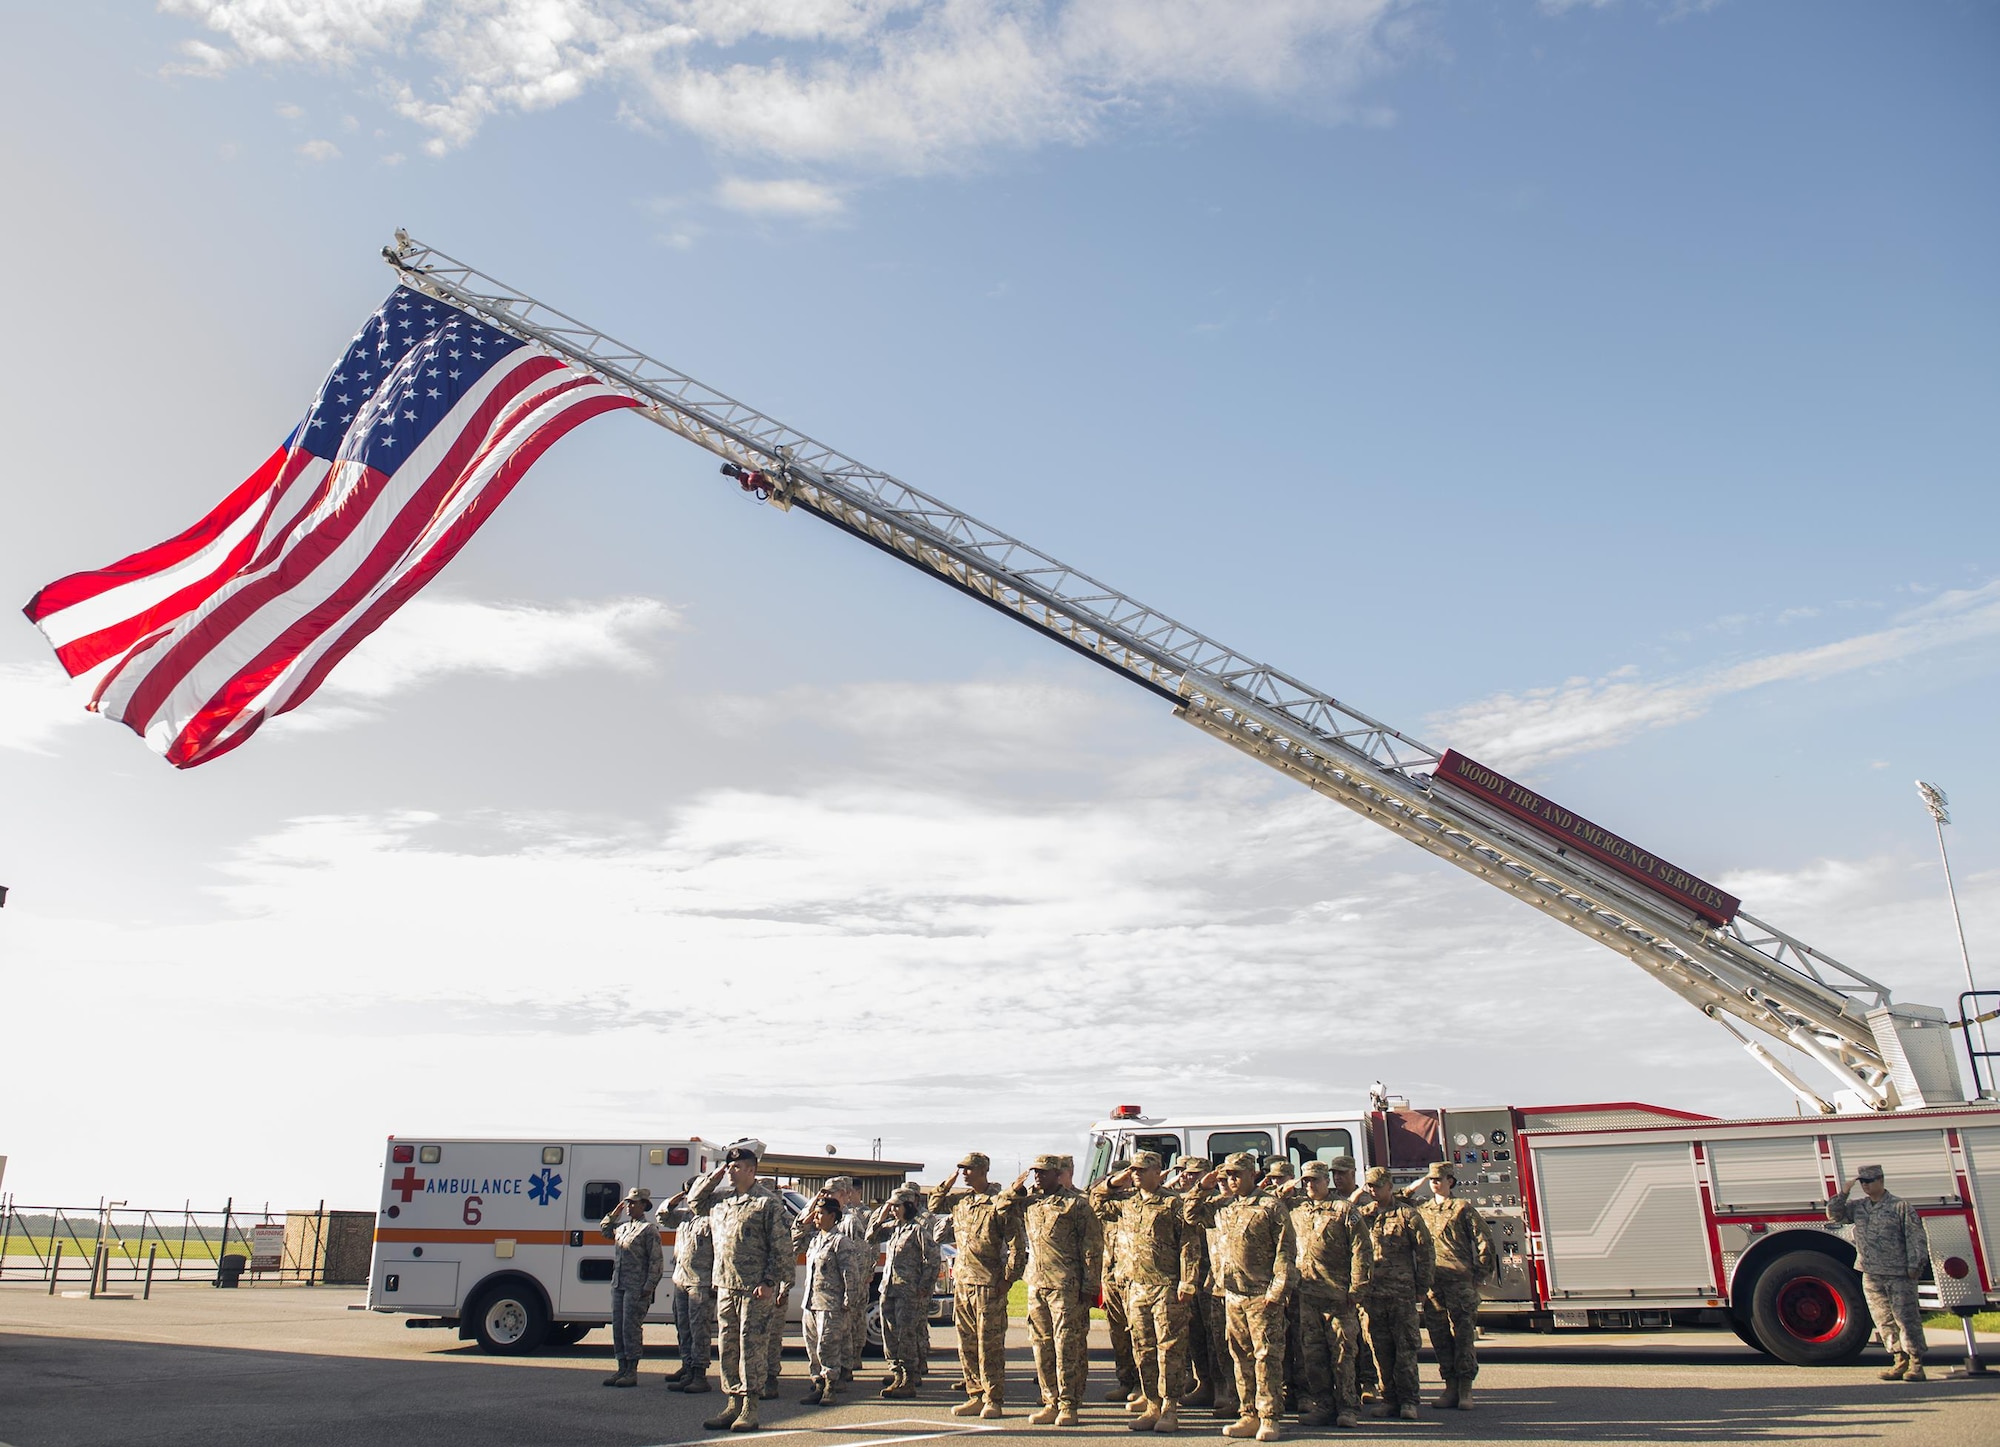 Airmen from the 105th Security Forces Squadron Air National Guard Base, N.Y., and the 23d SFS and 23d Civil Engineer Squadrons render salutes during a 9/11 remembrance ceremony Sept. 11, 2015, at Moody Air Force Base, Ga. Defenders from the 105th SFS assisted in the 9/11 rescue efforts. (U.S. Air Force photo/Airman 1st Class Greg Nash)